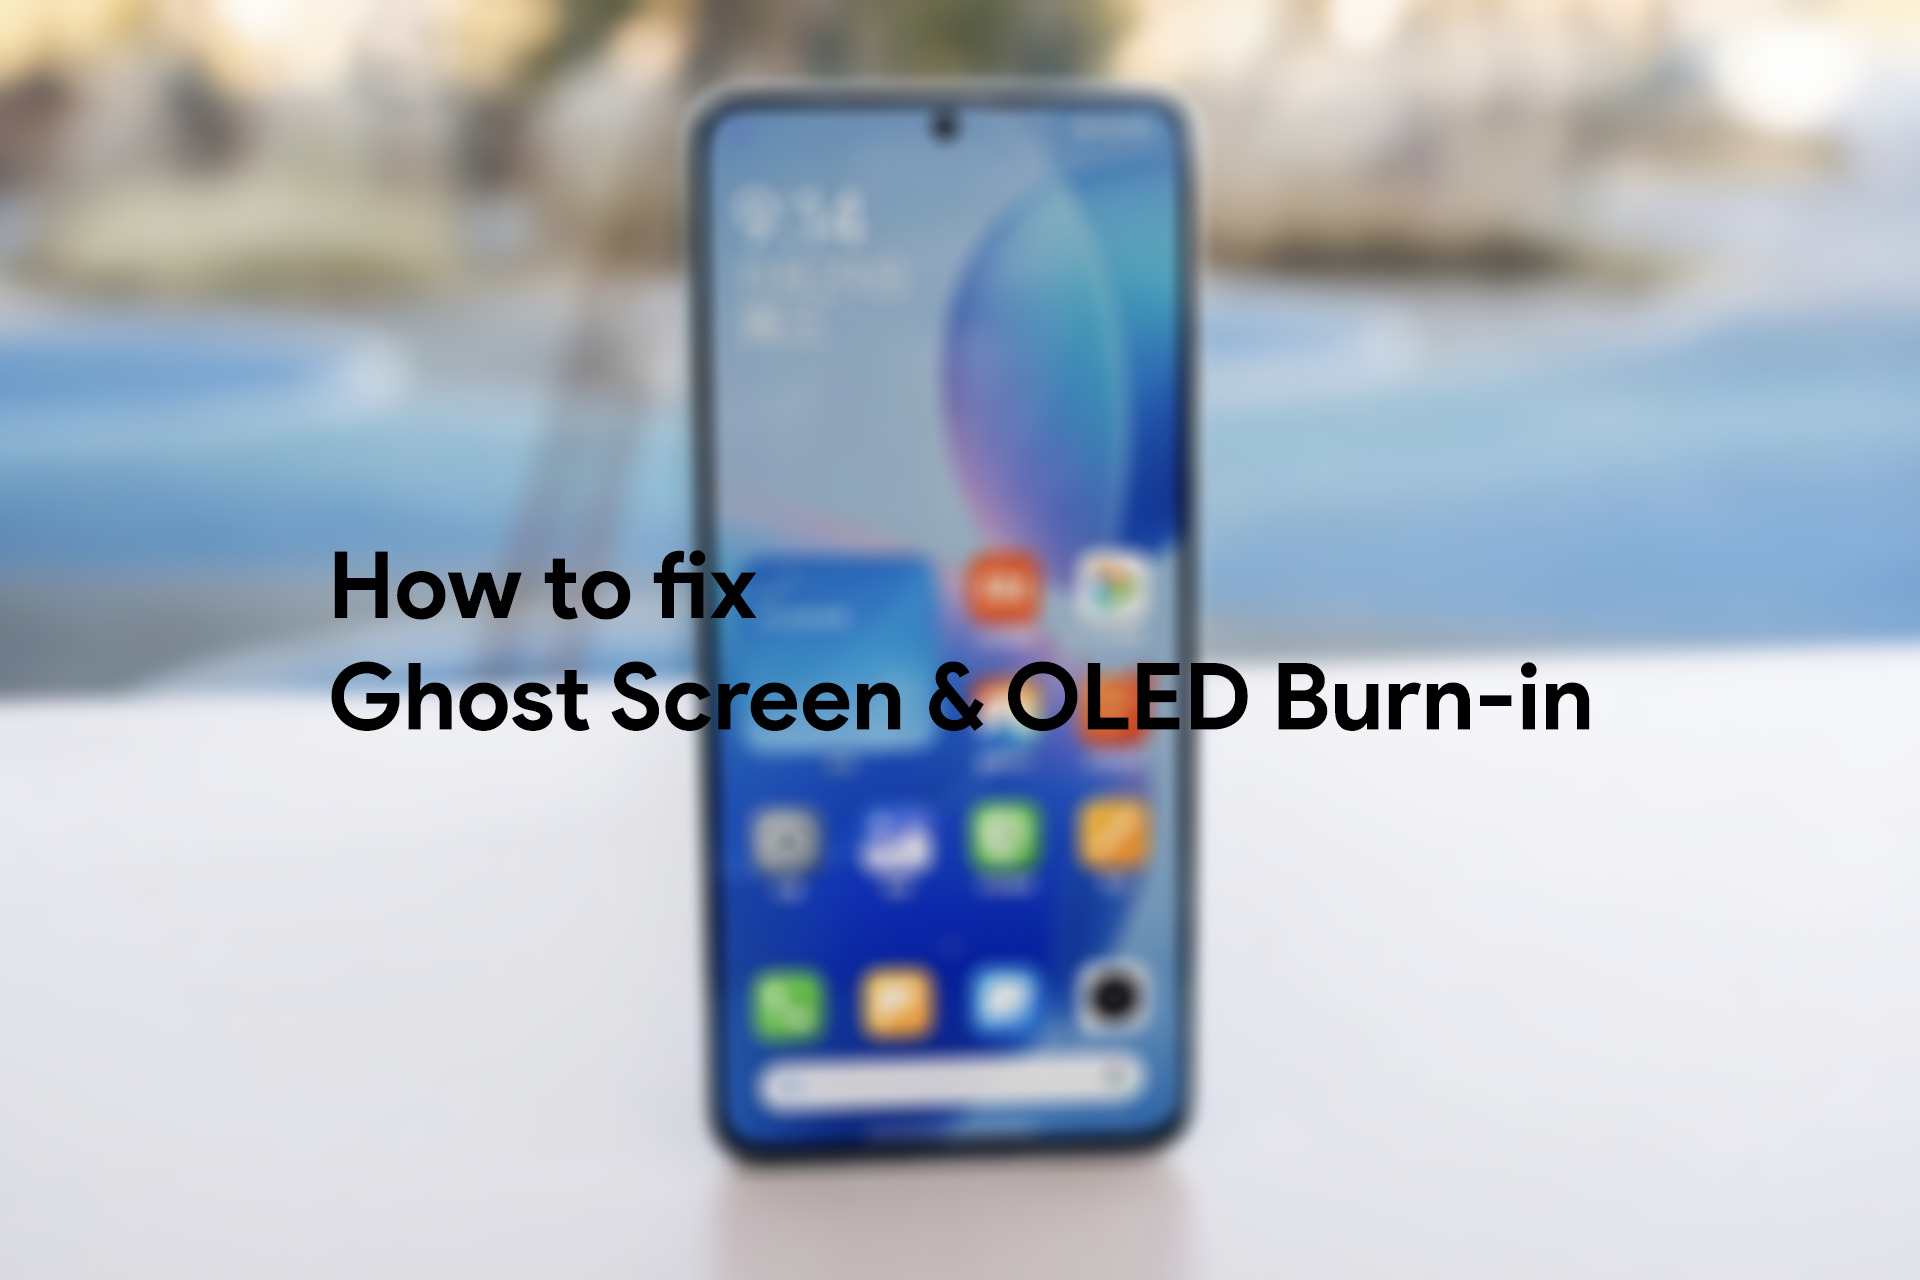 What’s the Ghost screen and burn-in and how to prevent?